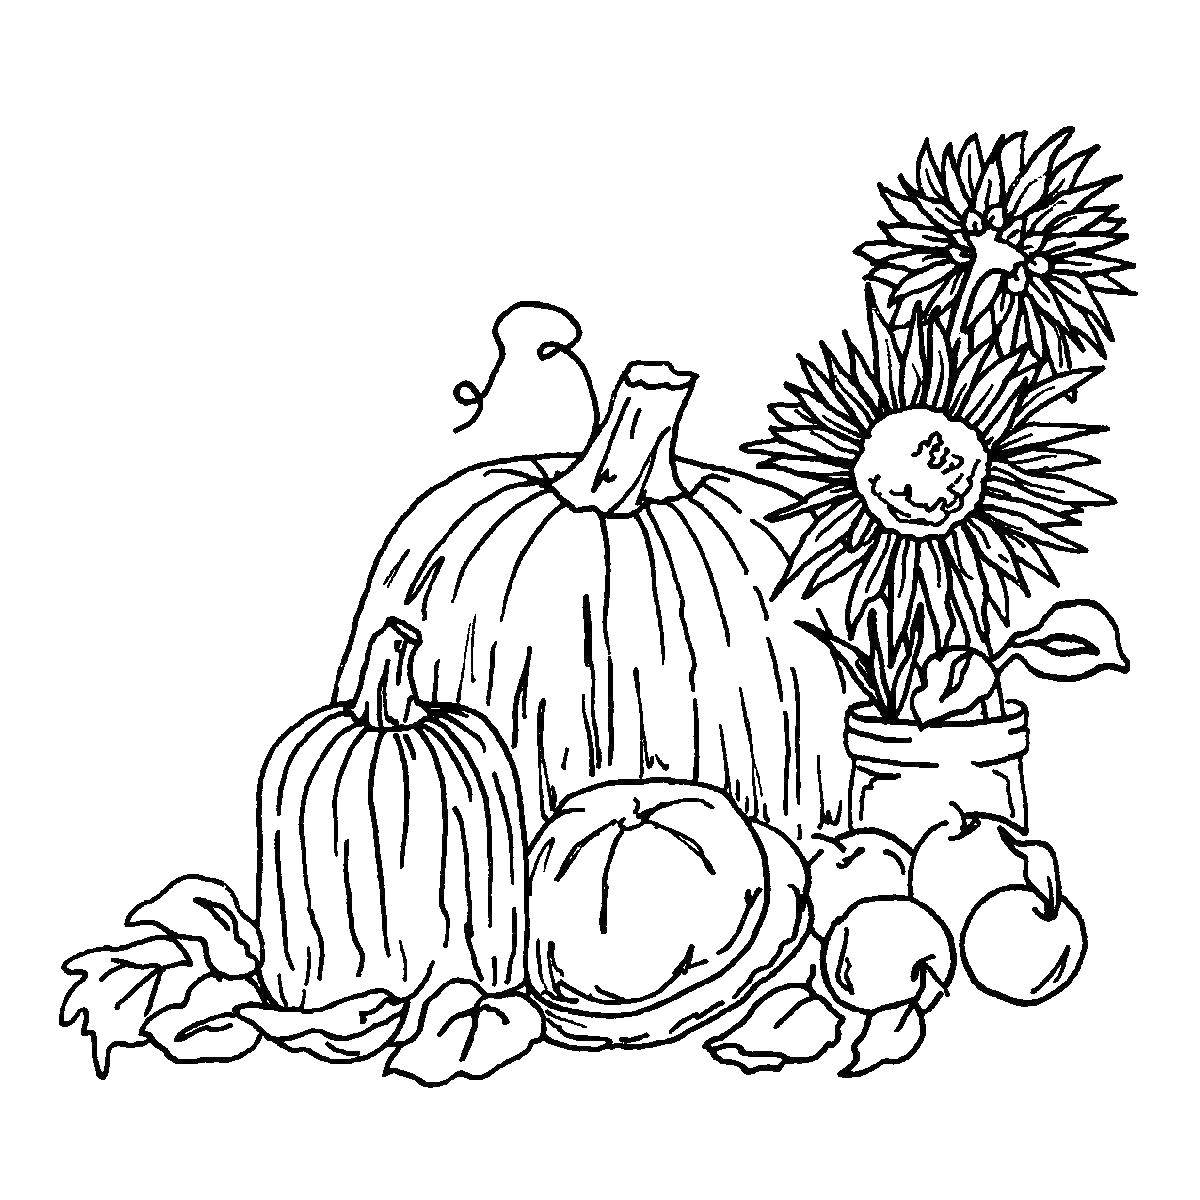 Coloring Autumn gifts. Category Autumn. Tags:  fall, harvest, gifts.